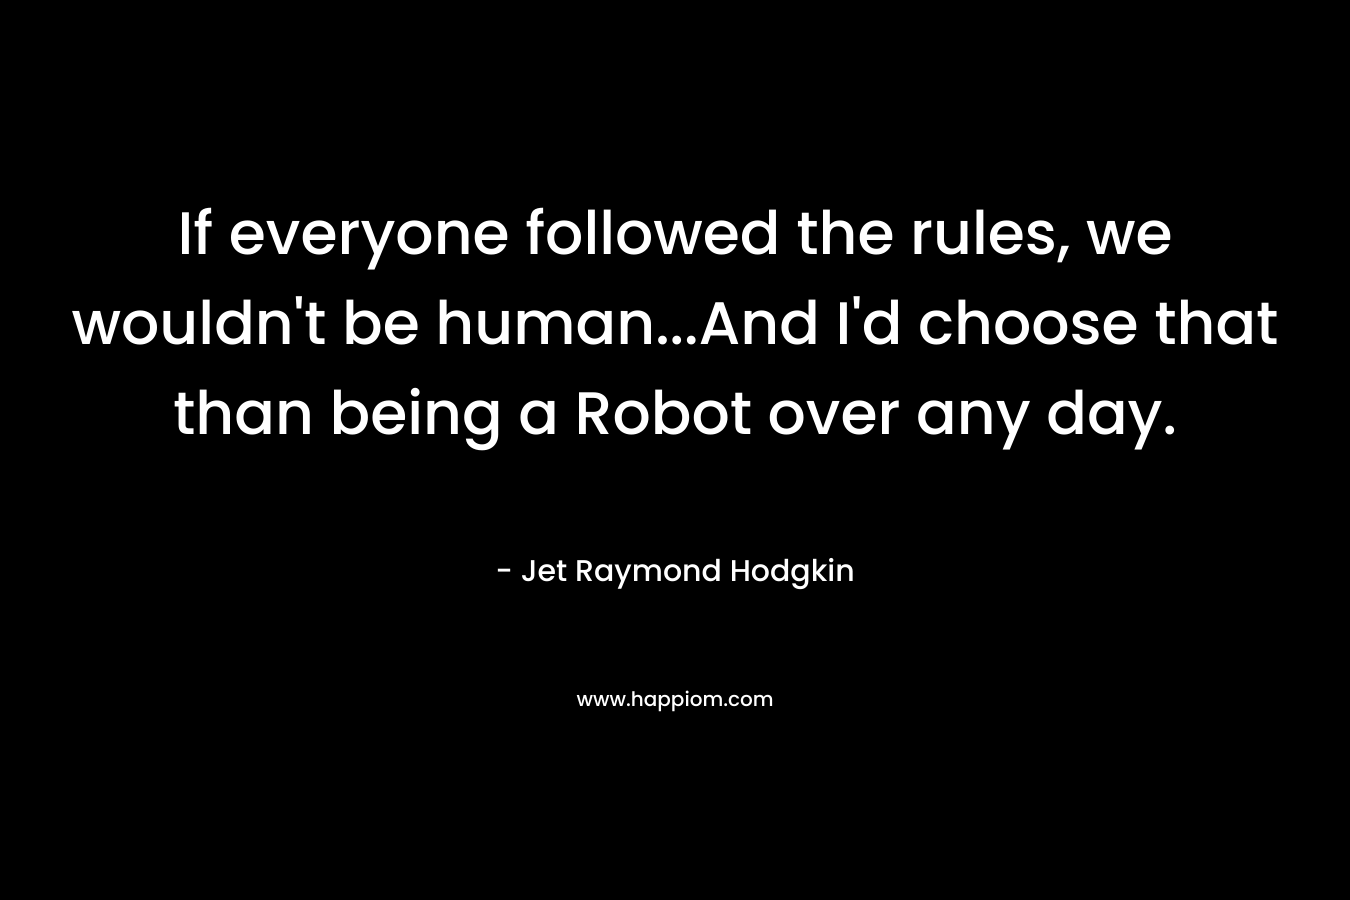 If everyone followed the rules, we wouldn't be human...And I'd choose that than being a Robot over any day.